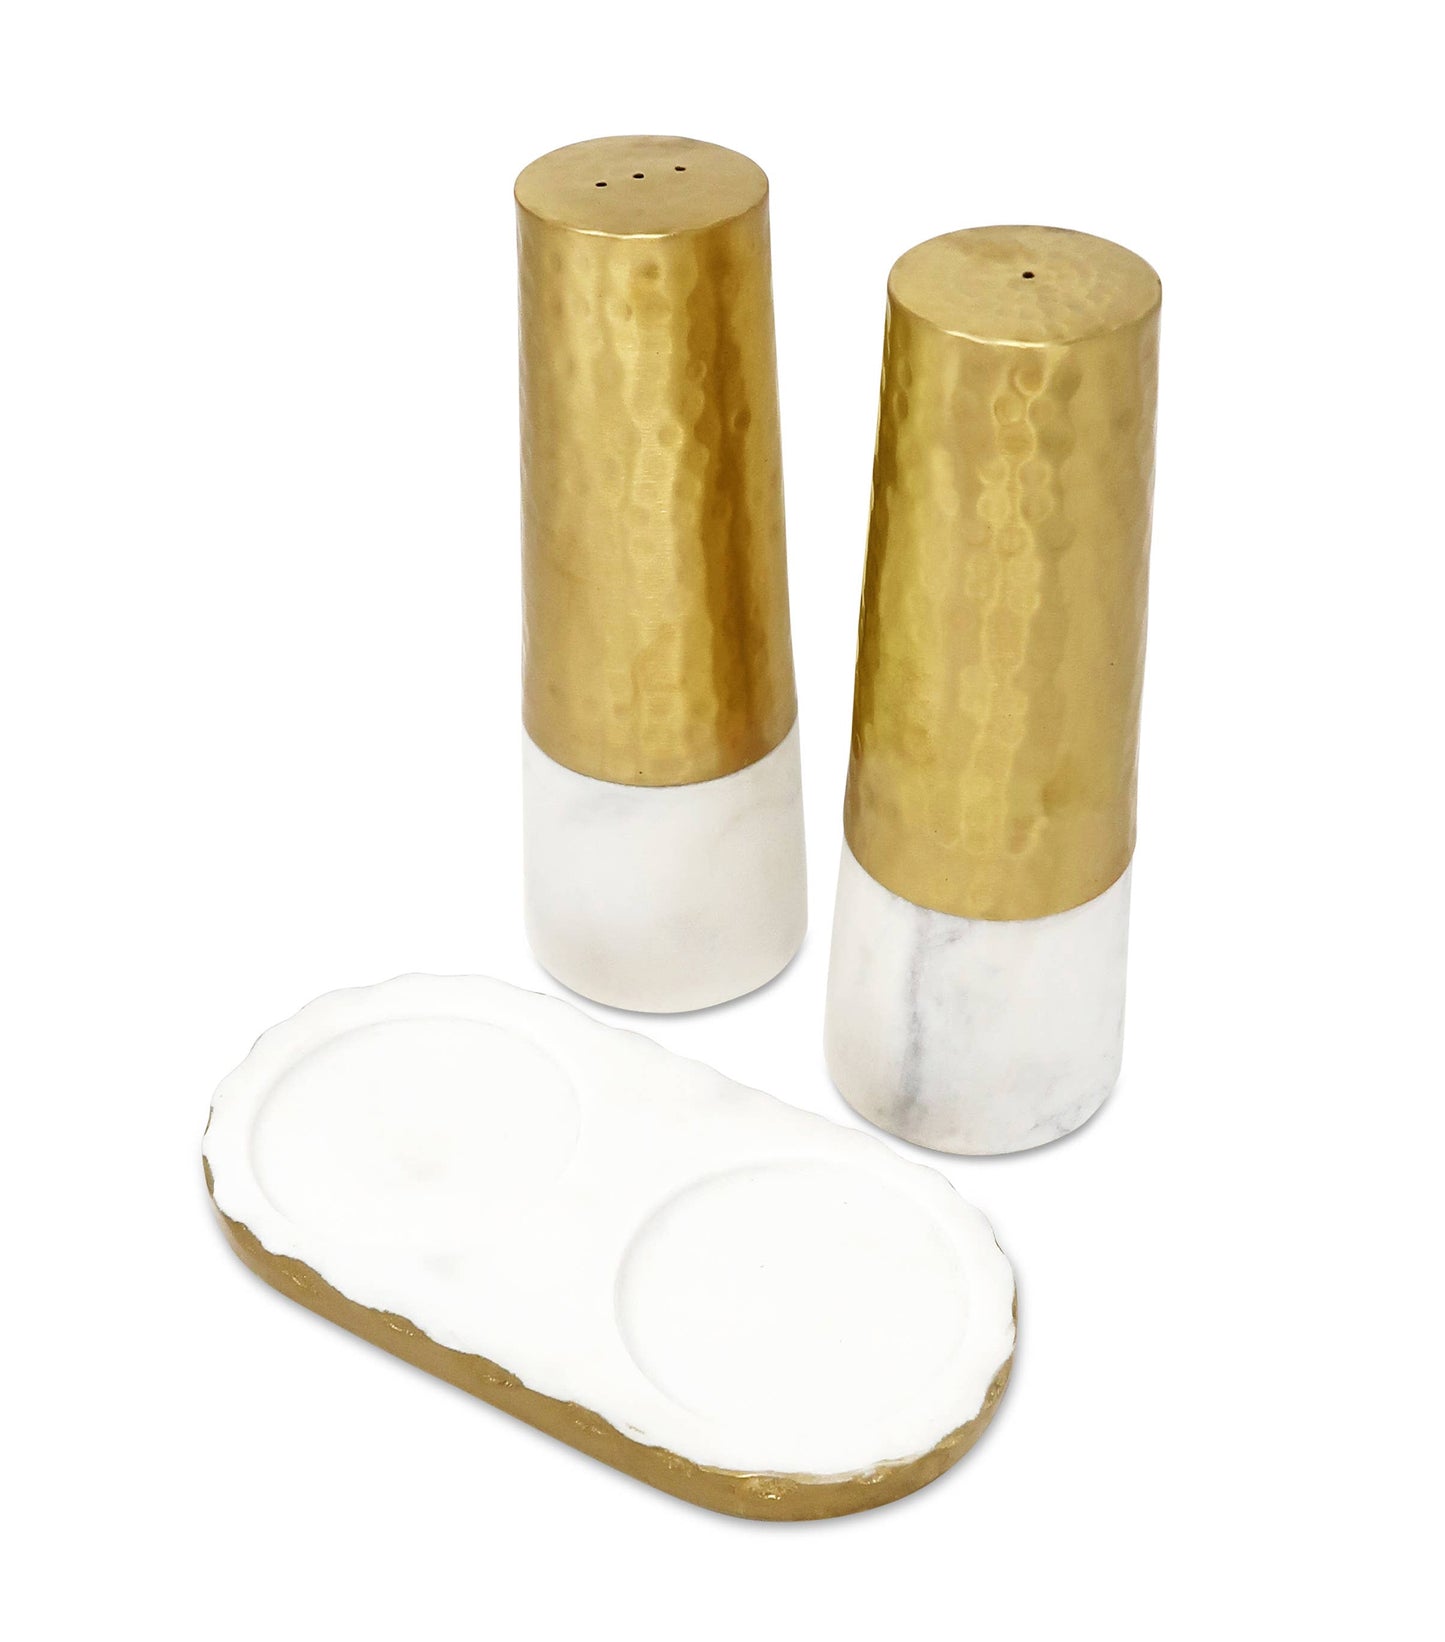 Marble and Gold Salt & Pepper Shaker  Set on Tray, 8"